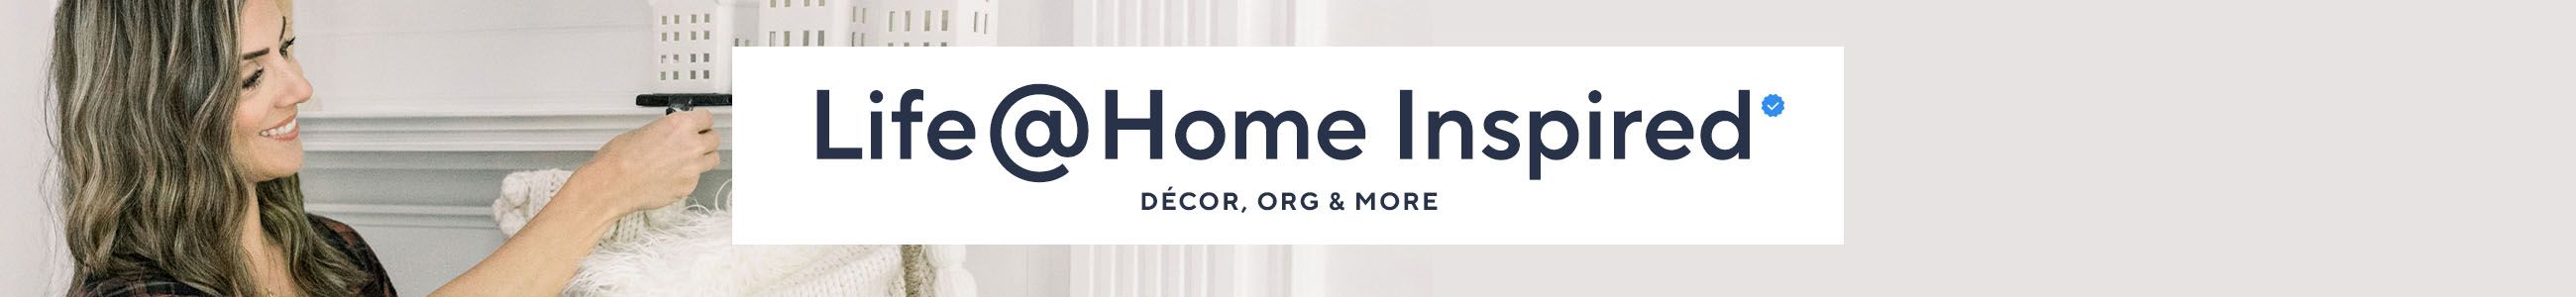 Life @ Home Inspired Décor, Org & More 